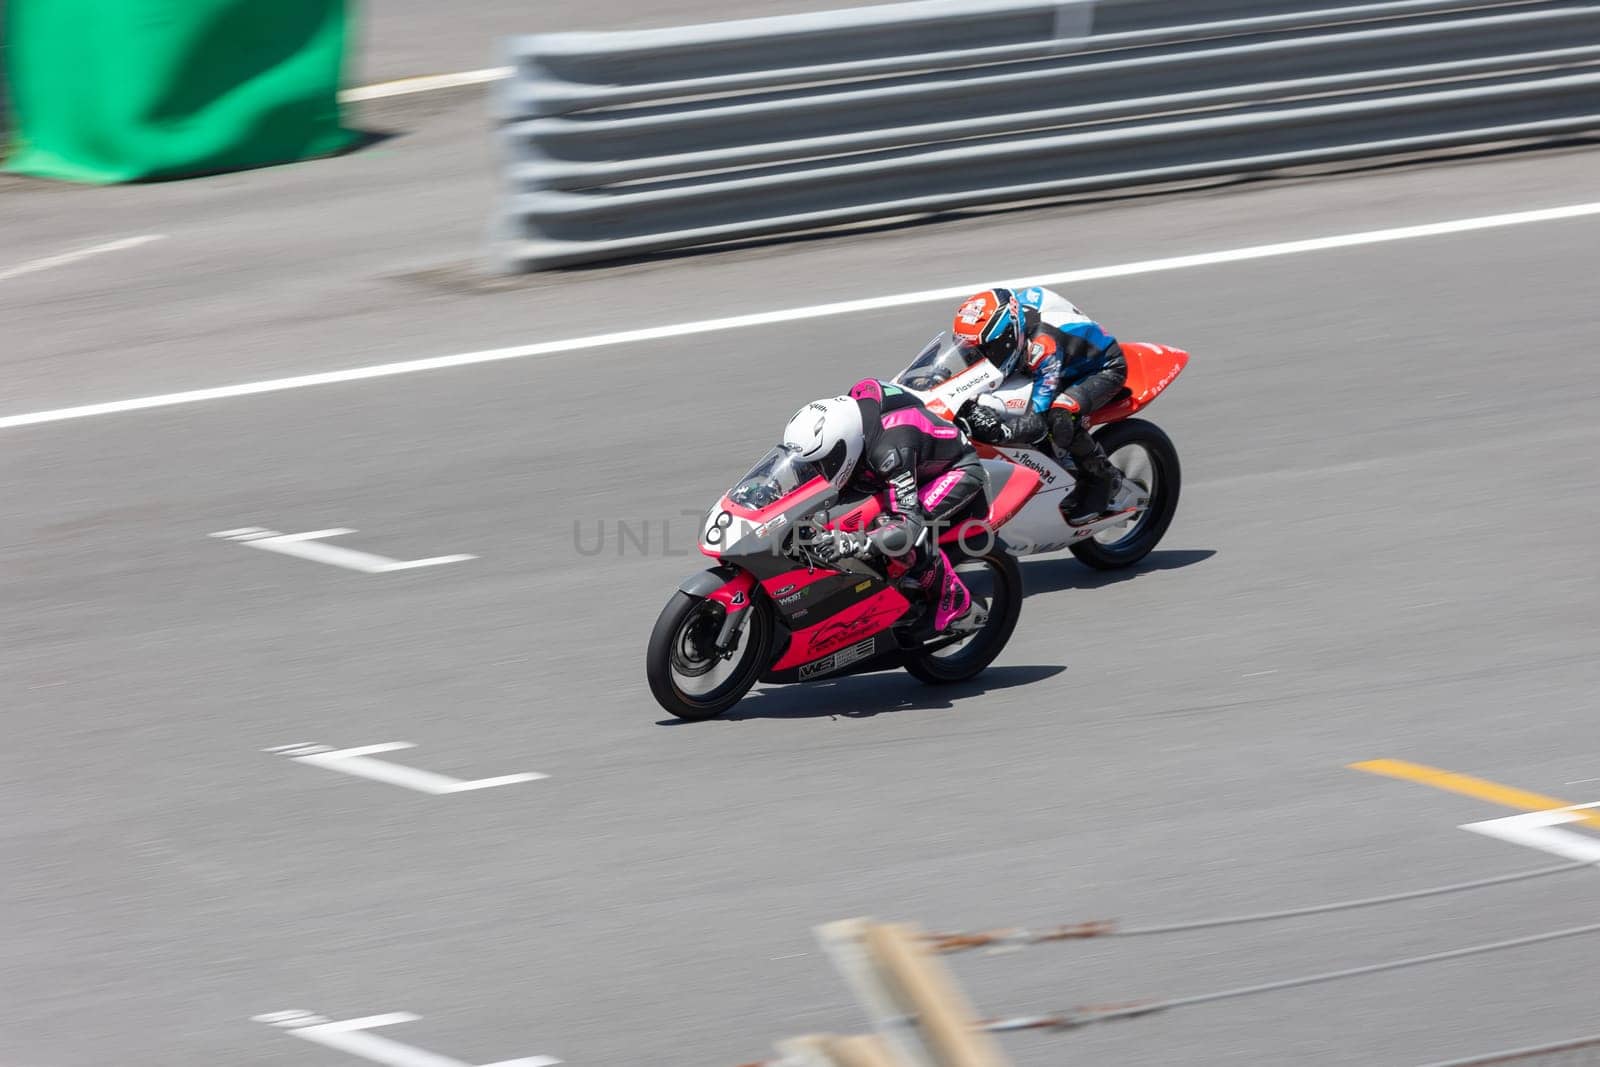 6 may 2023, Estoril, Portugal - MotoGP racing - Two people riding motorcycles on a race track